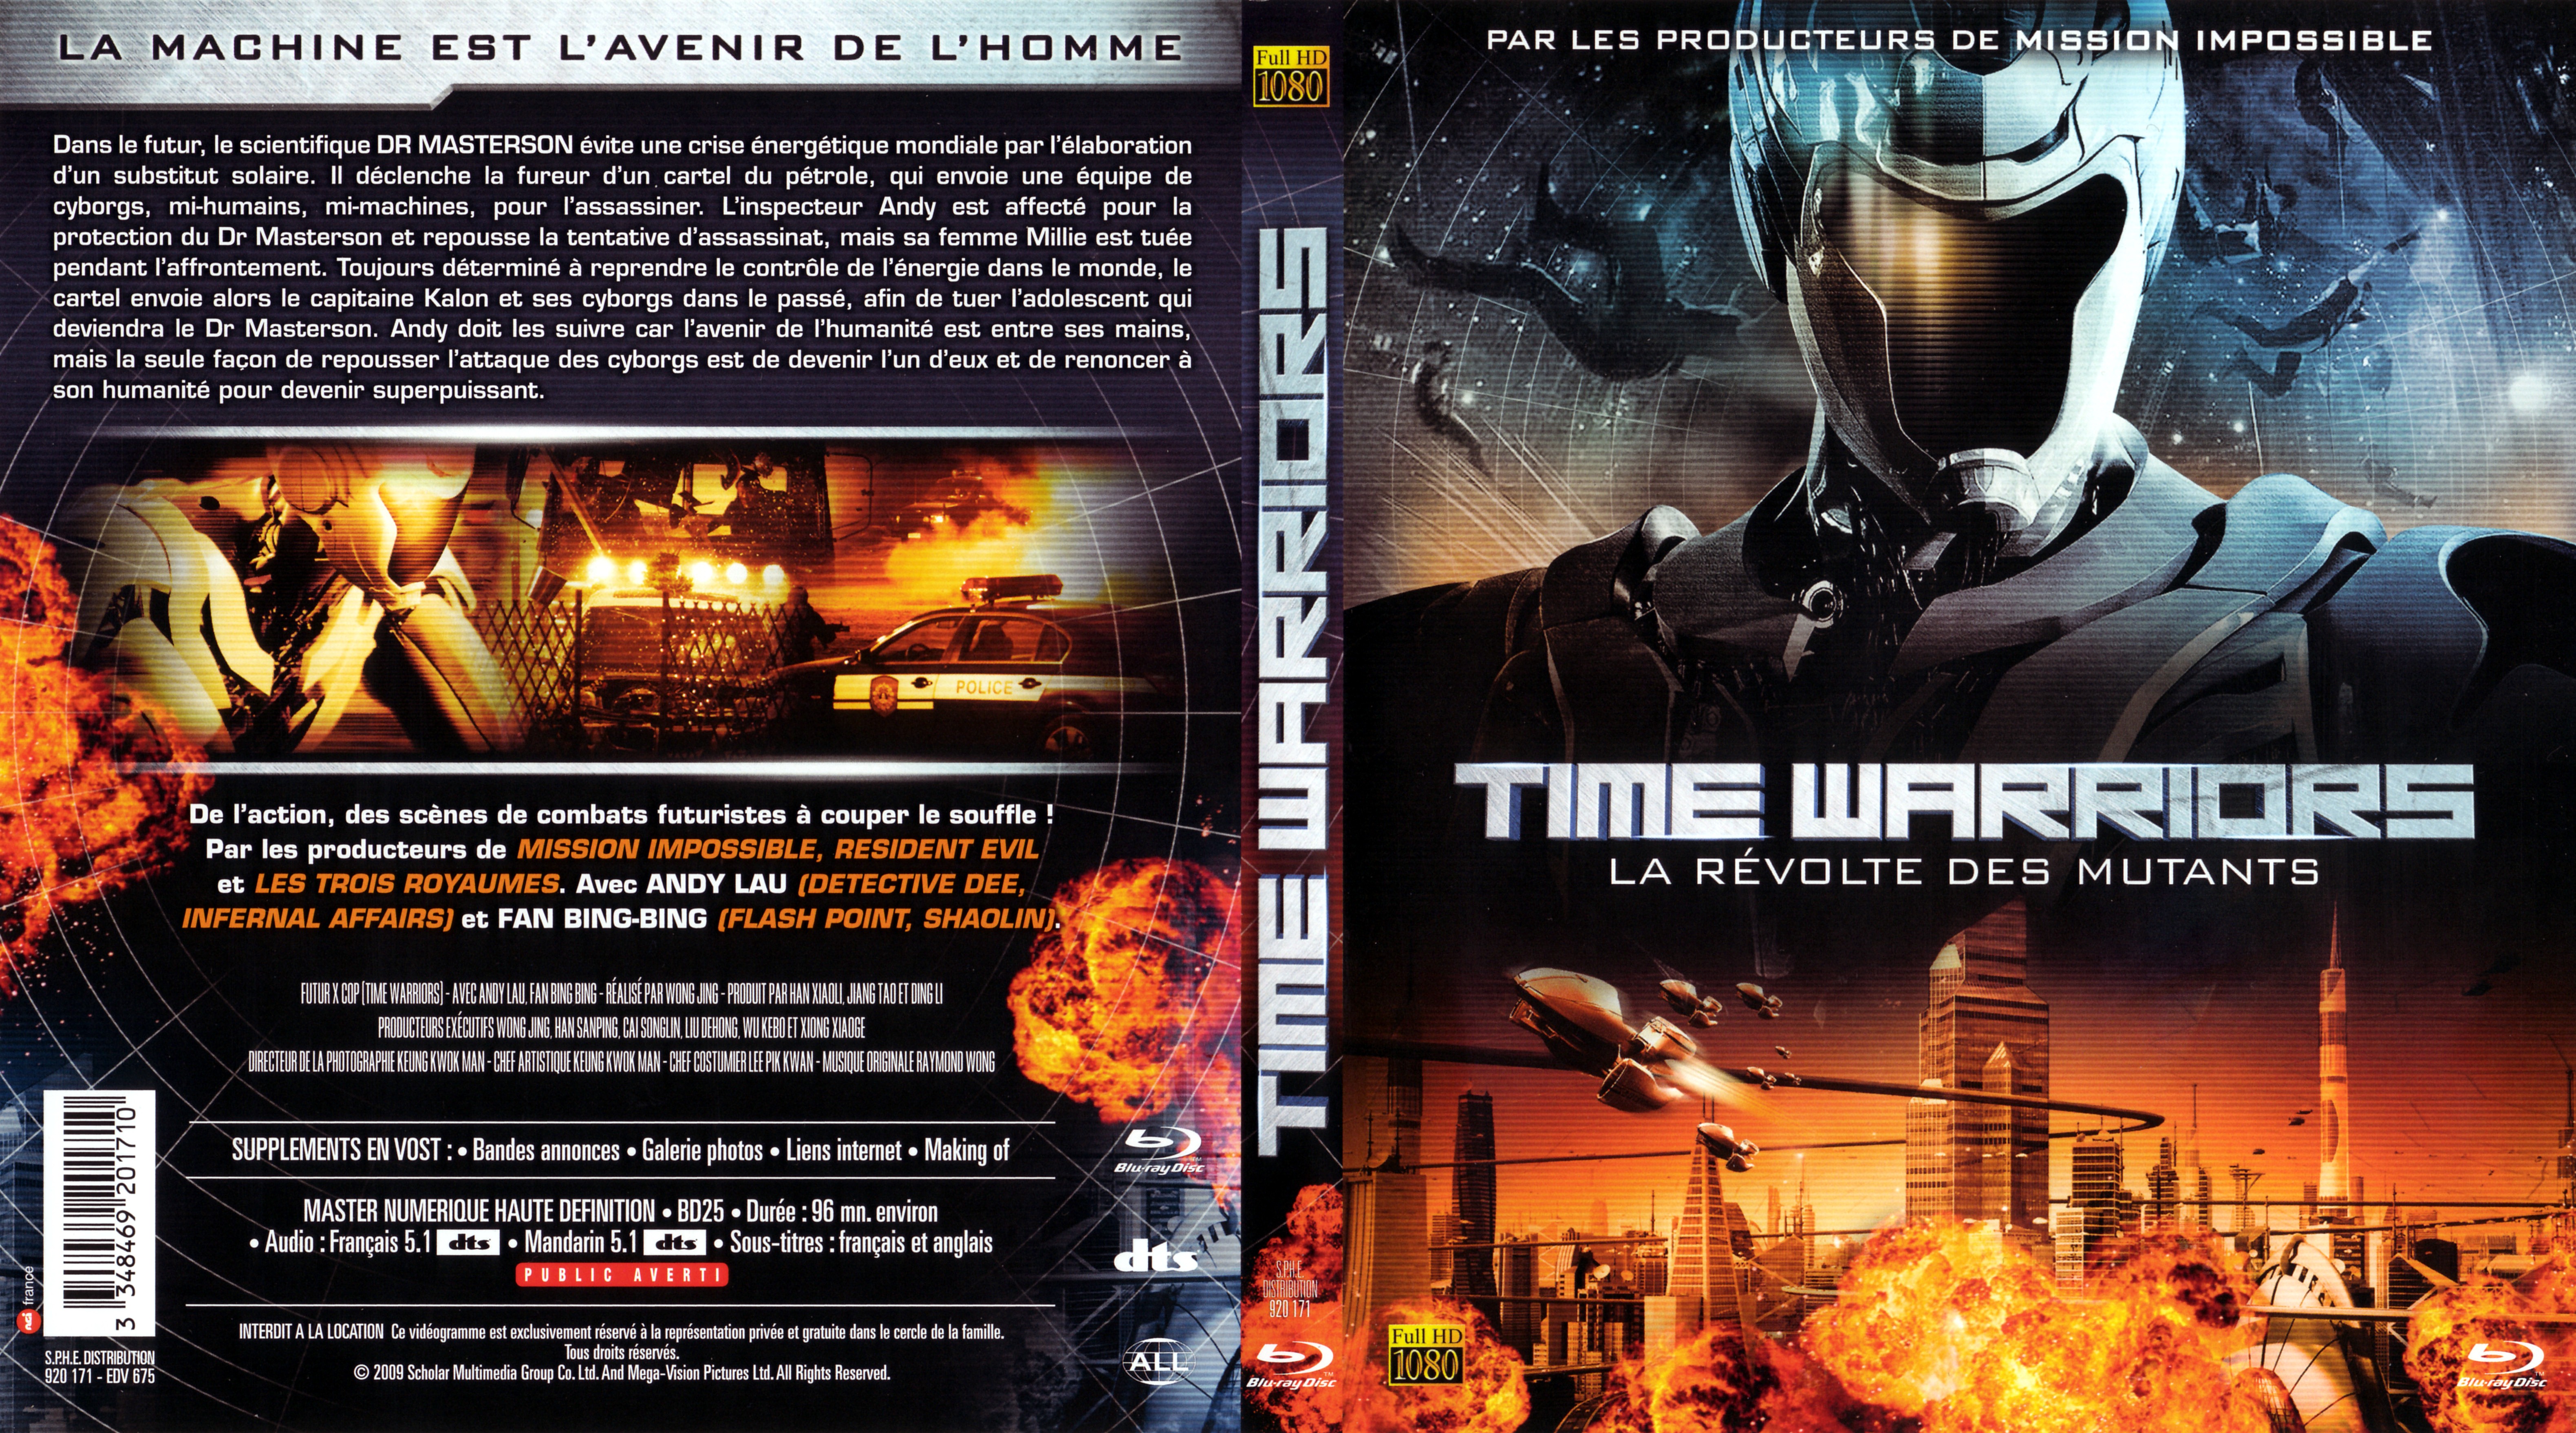 Jaquette DVD Time warriors (2009) (BLU-RAY)